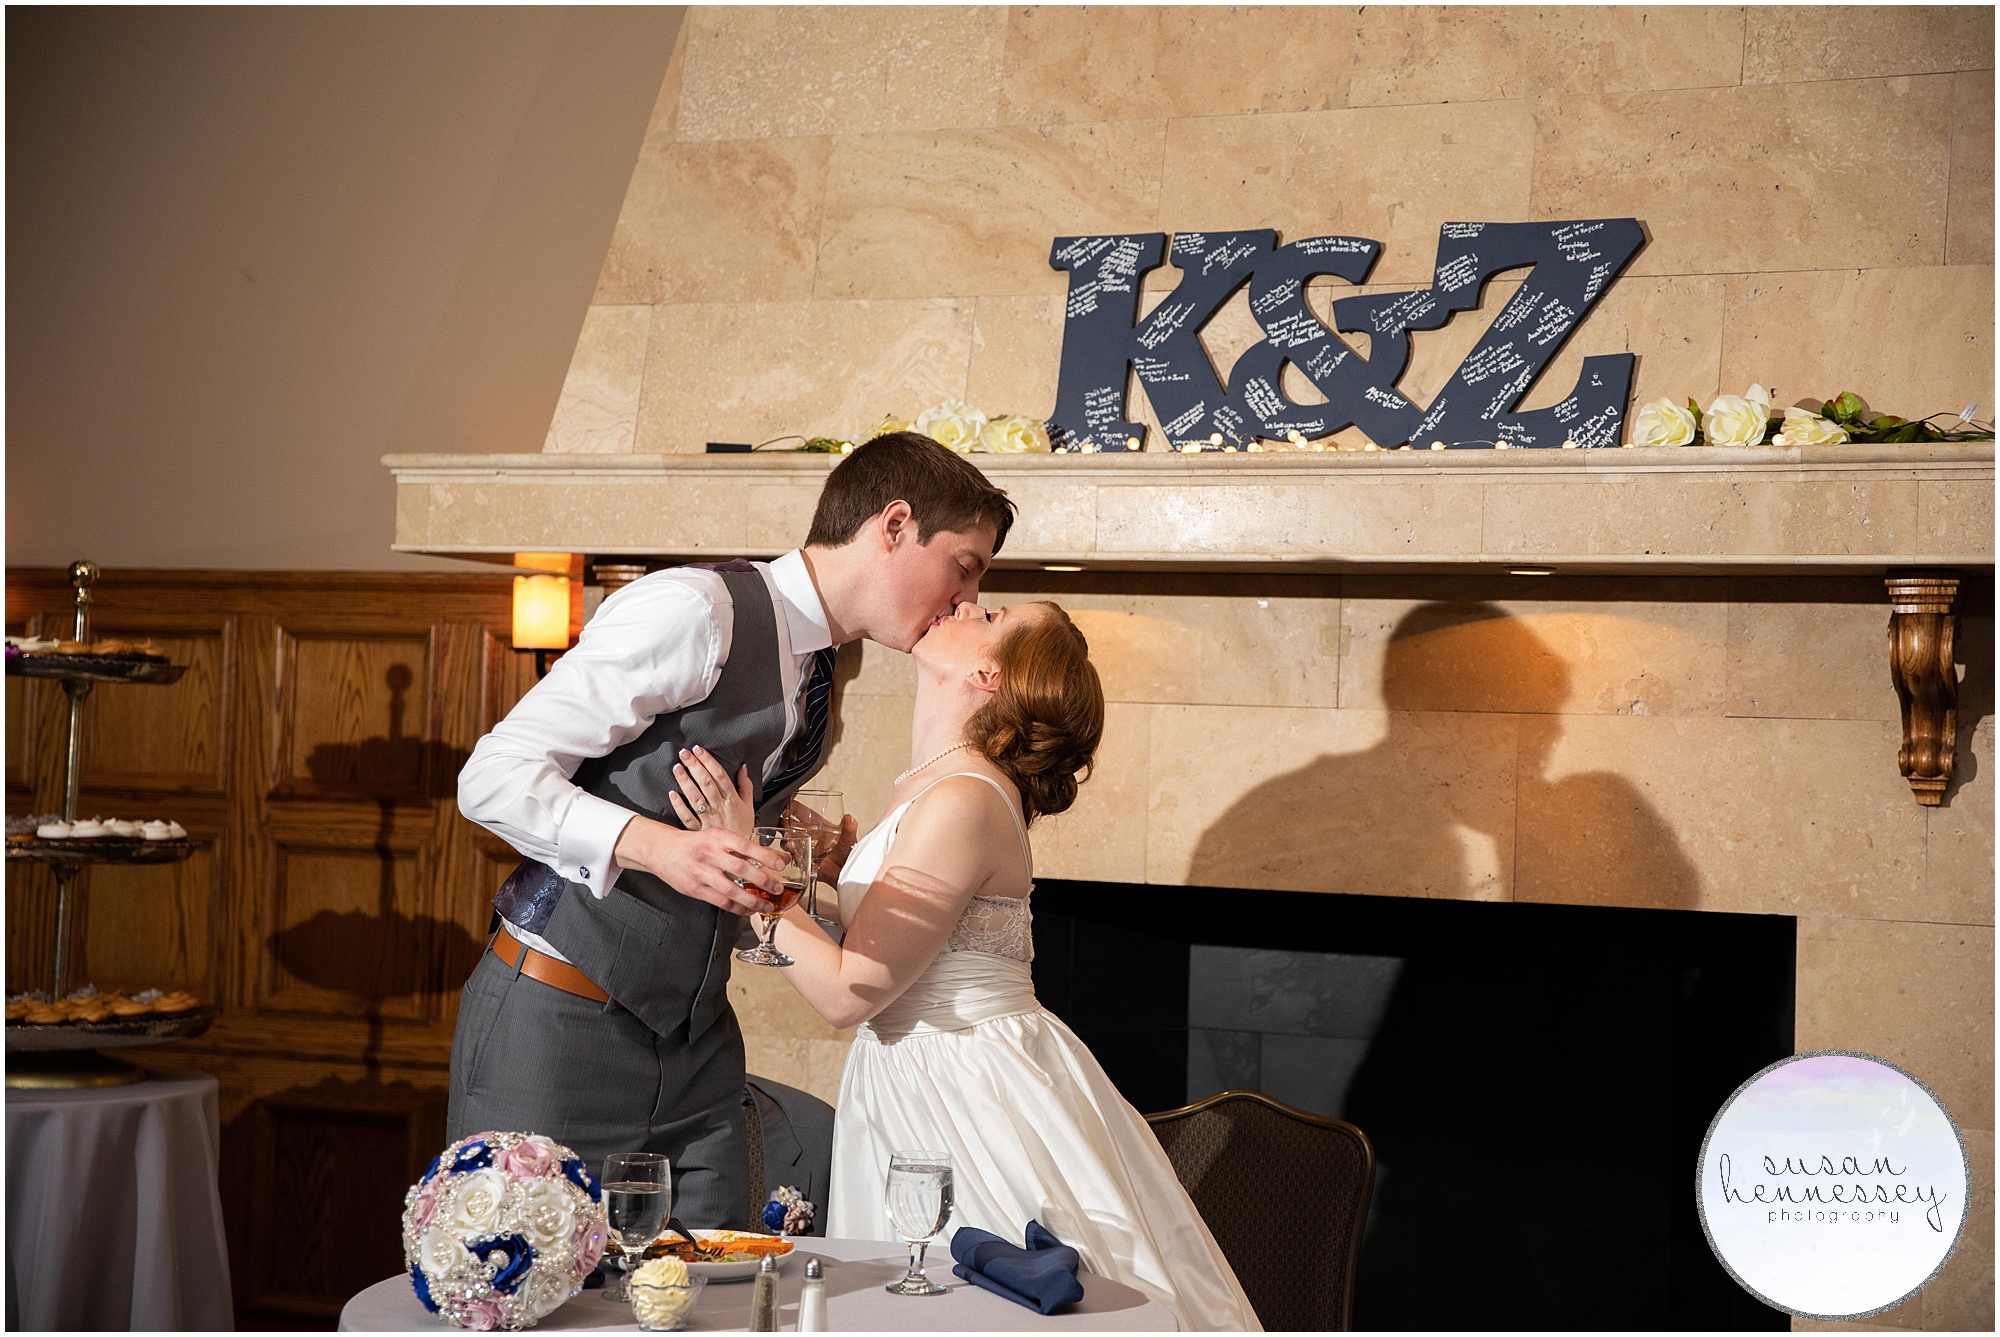 Bride and groom kiss at sweetheart table.